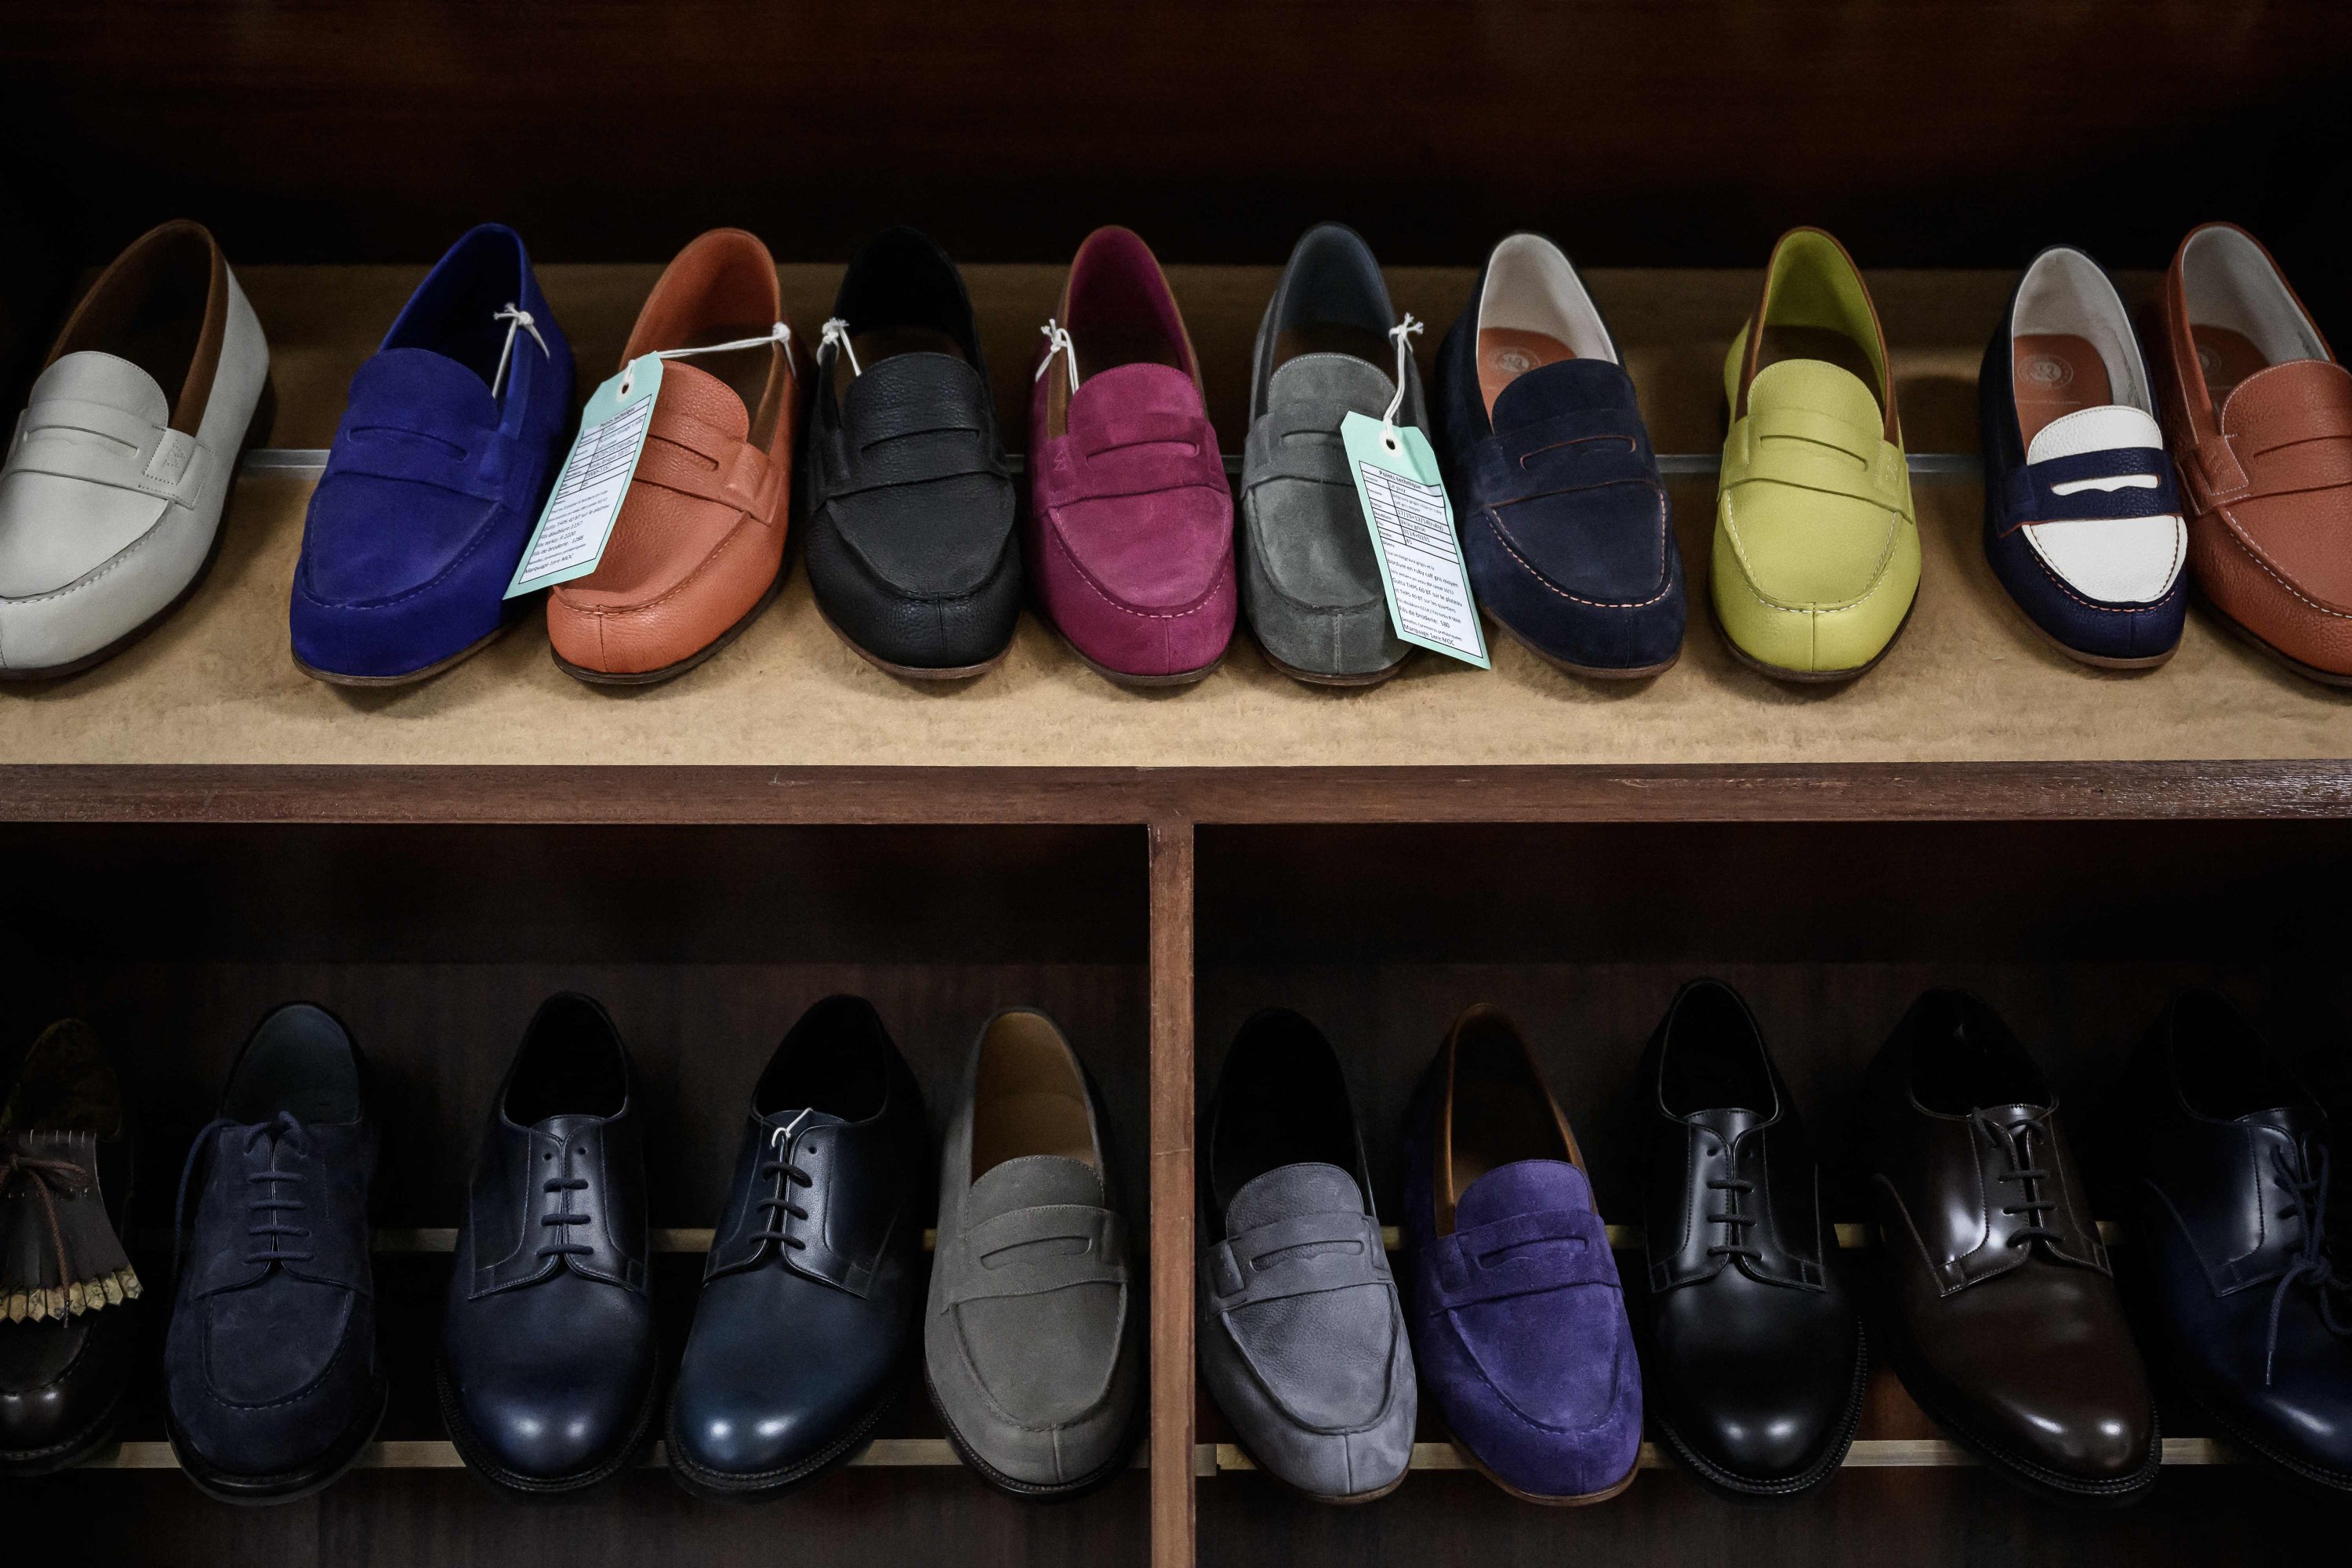 Formal shoes, loafers, moccasins sneak past sneakers in popularity Daily Sabah